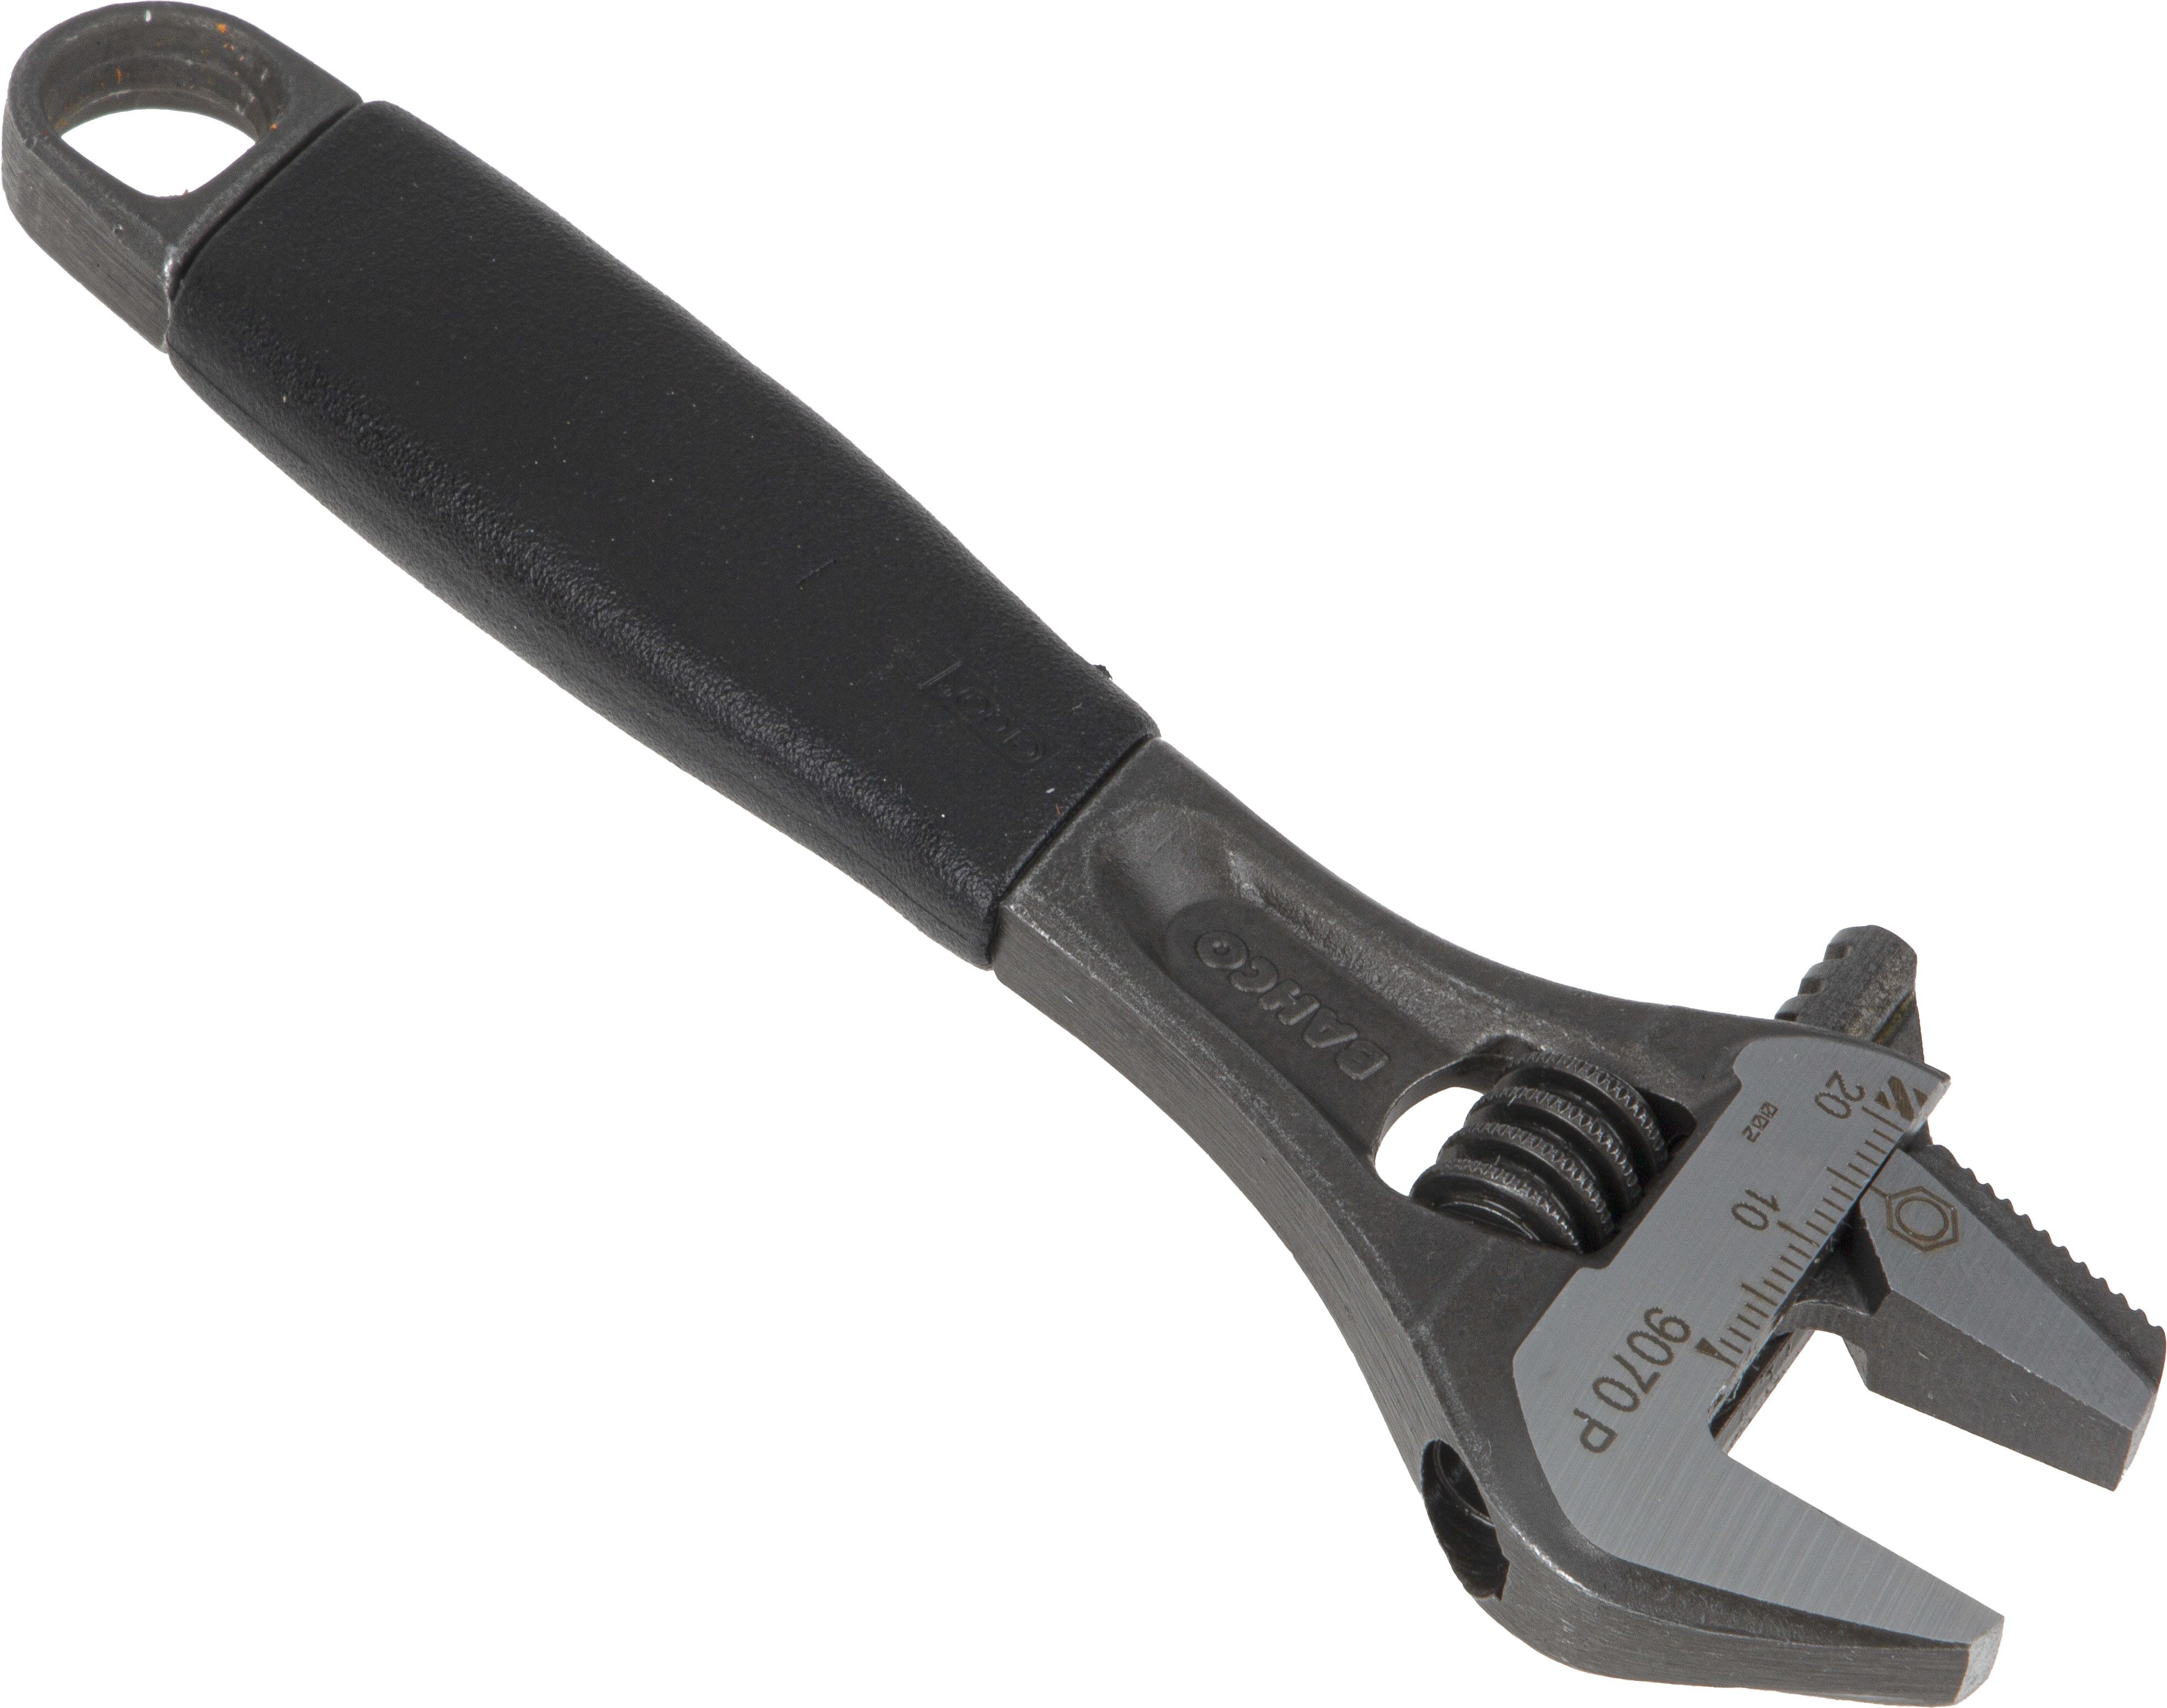 Bahco Adjustable Spanner, 158 mm Overall Length, 21mm Max Jaw Capacity